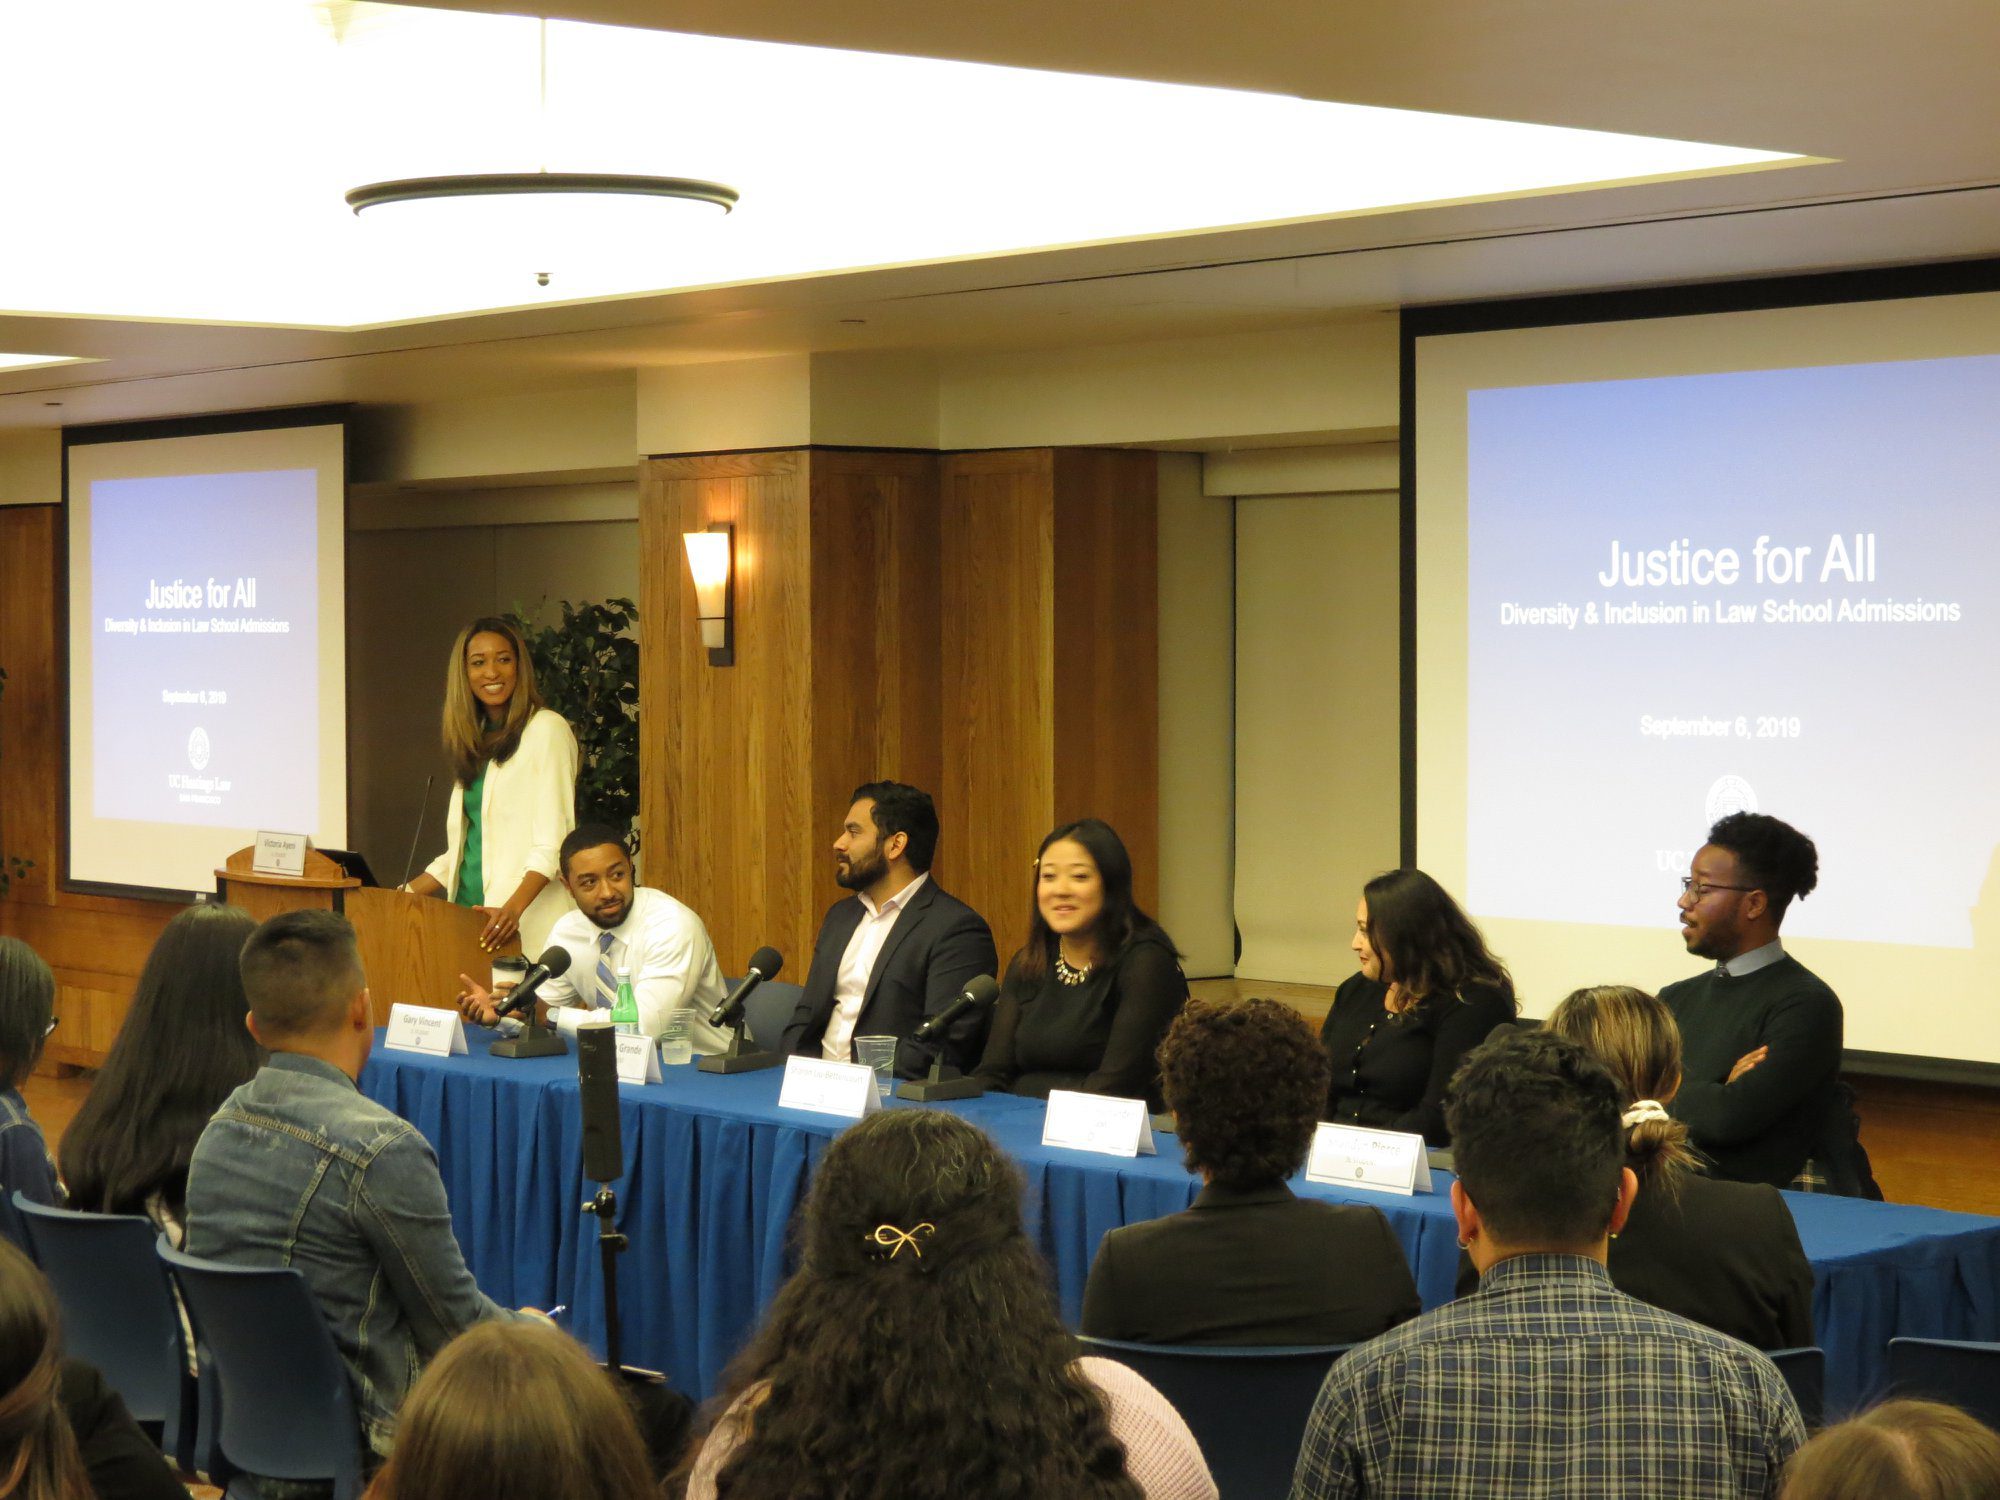 justice for all panel, students sitting, panelists sitting and talking to room